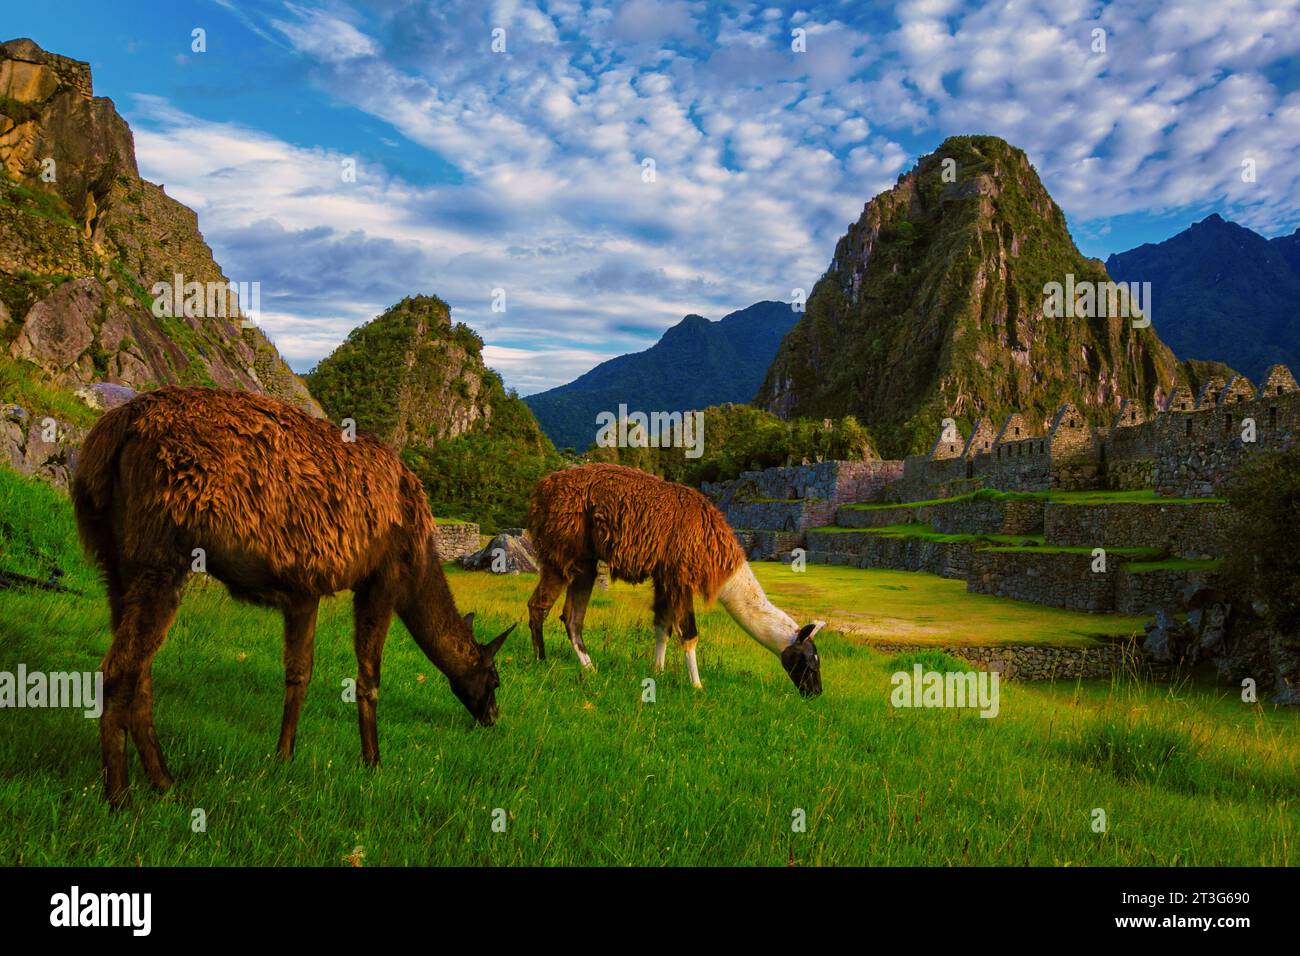 Llamas in the foreground with Huaynapicchu mountain in the background, Machupicchu Peru. Stock Photo